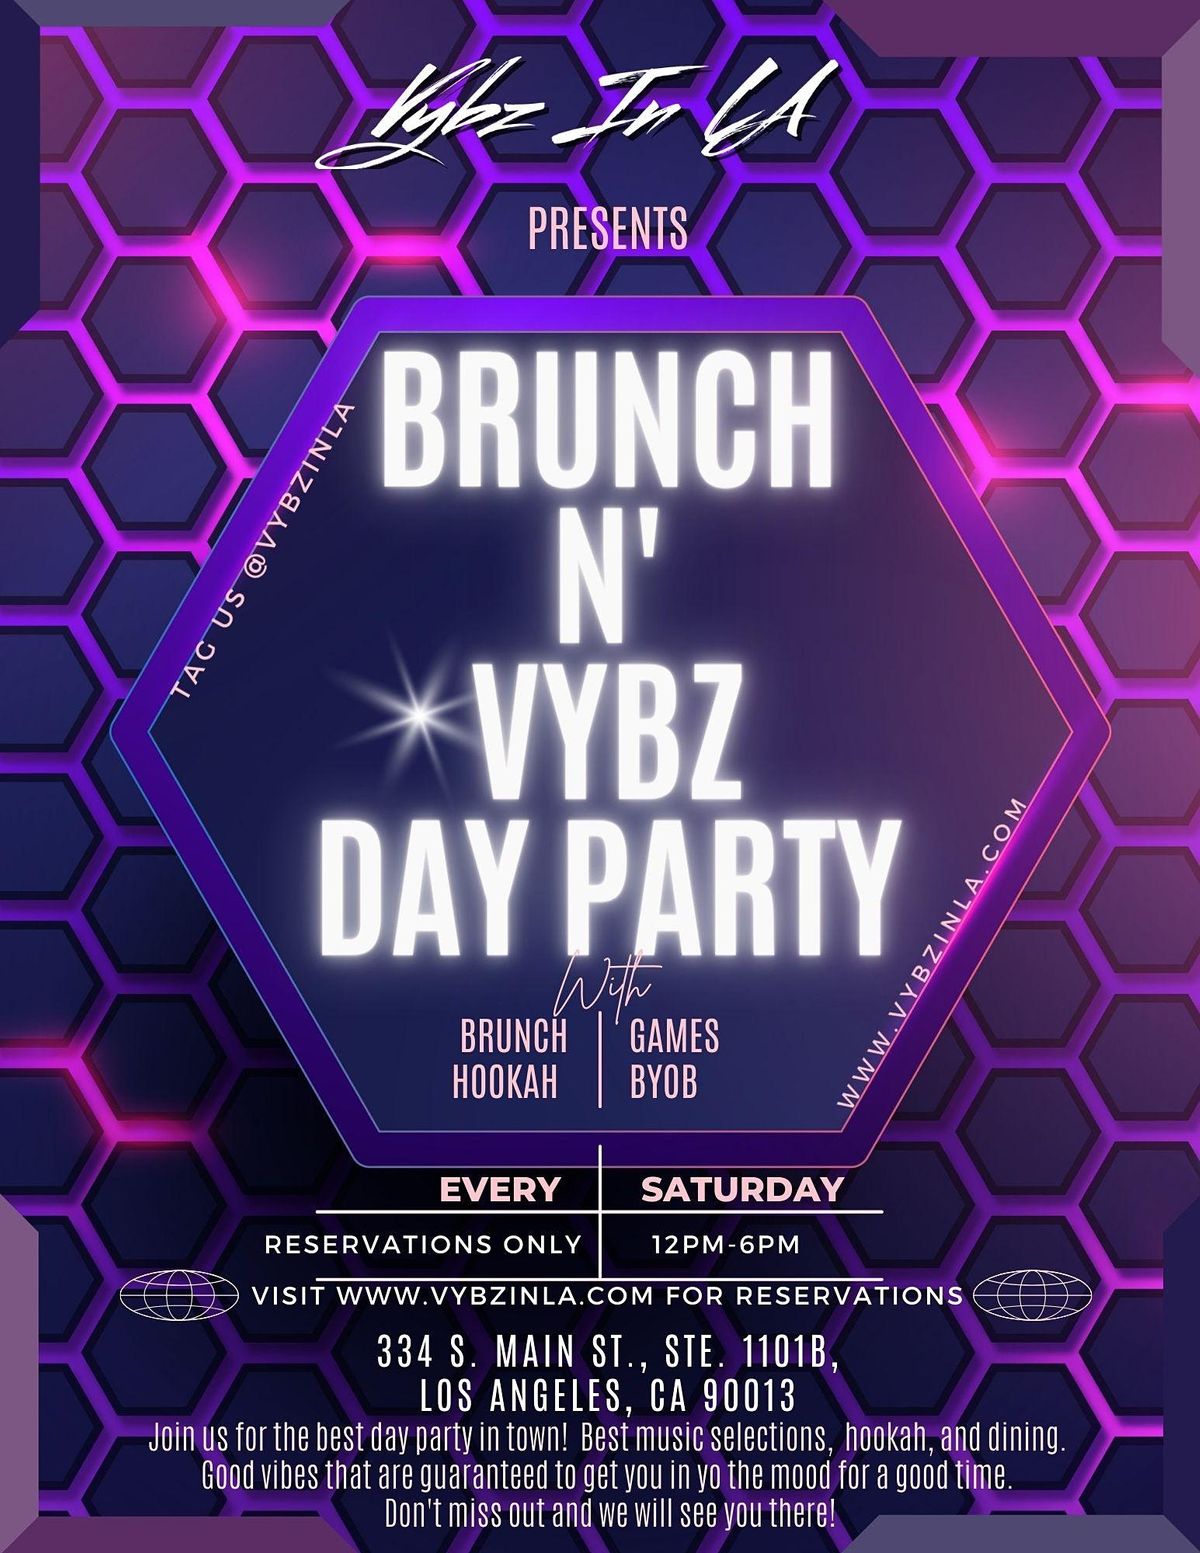 BRUNCH N' VYBZ DAY PARTY